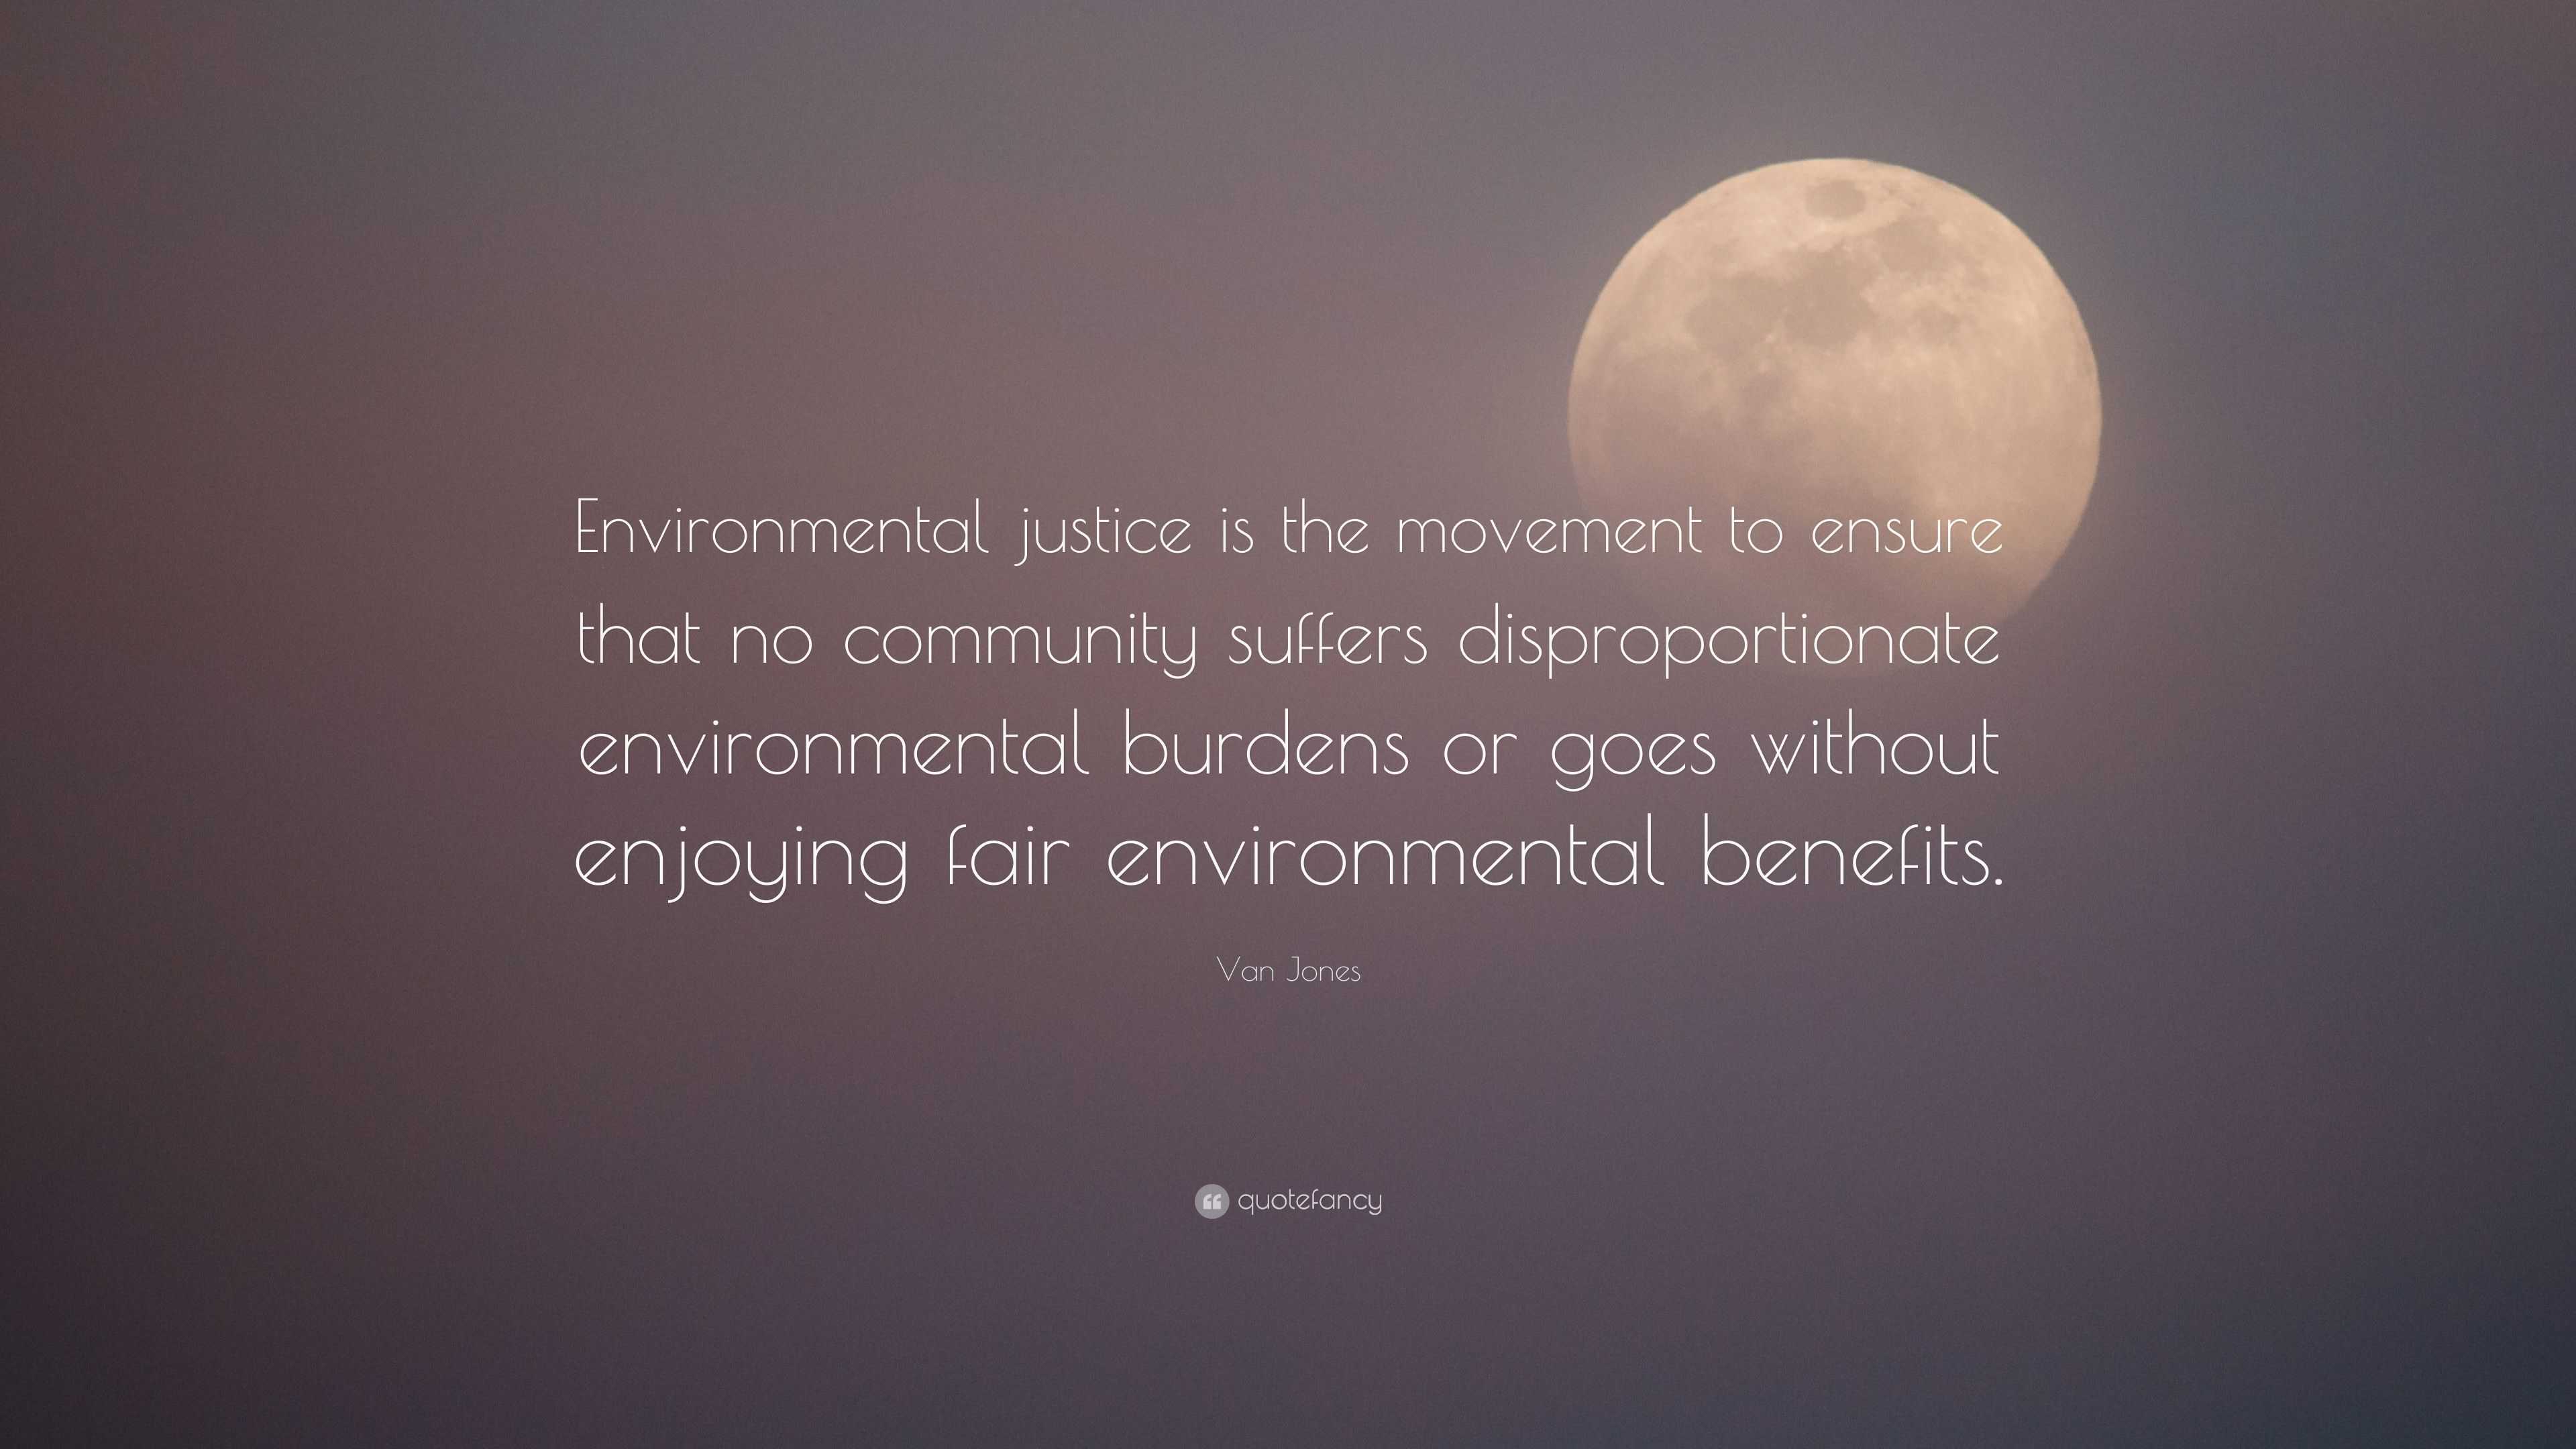 Van Jones Quote: “Environmental justice is the movement to ensure that